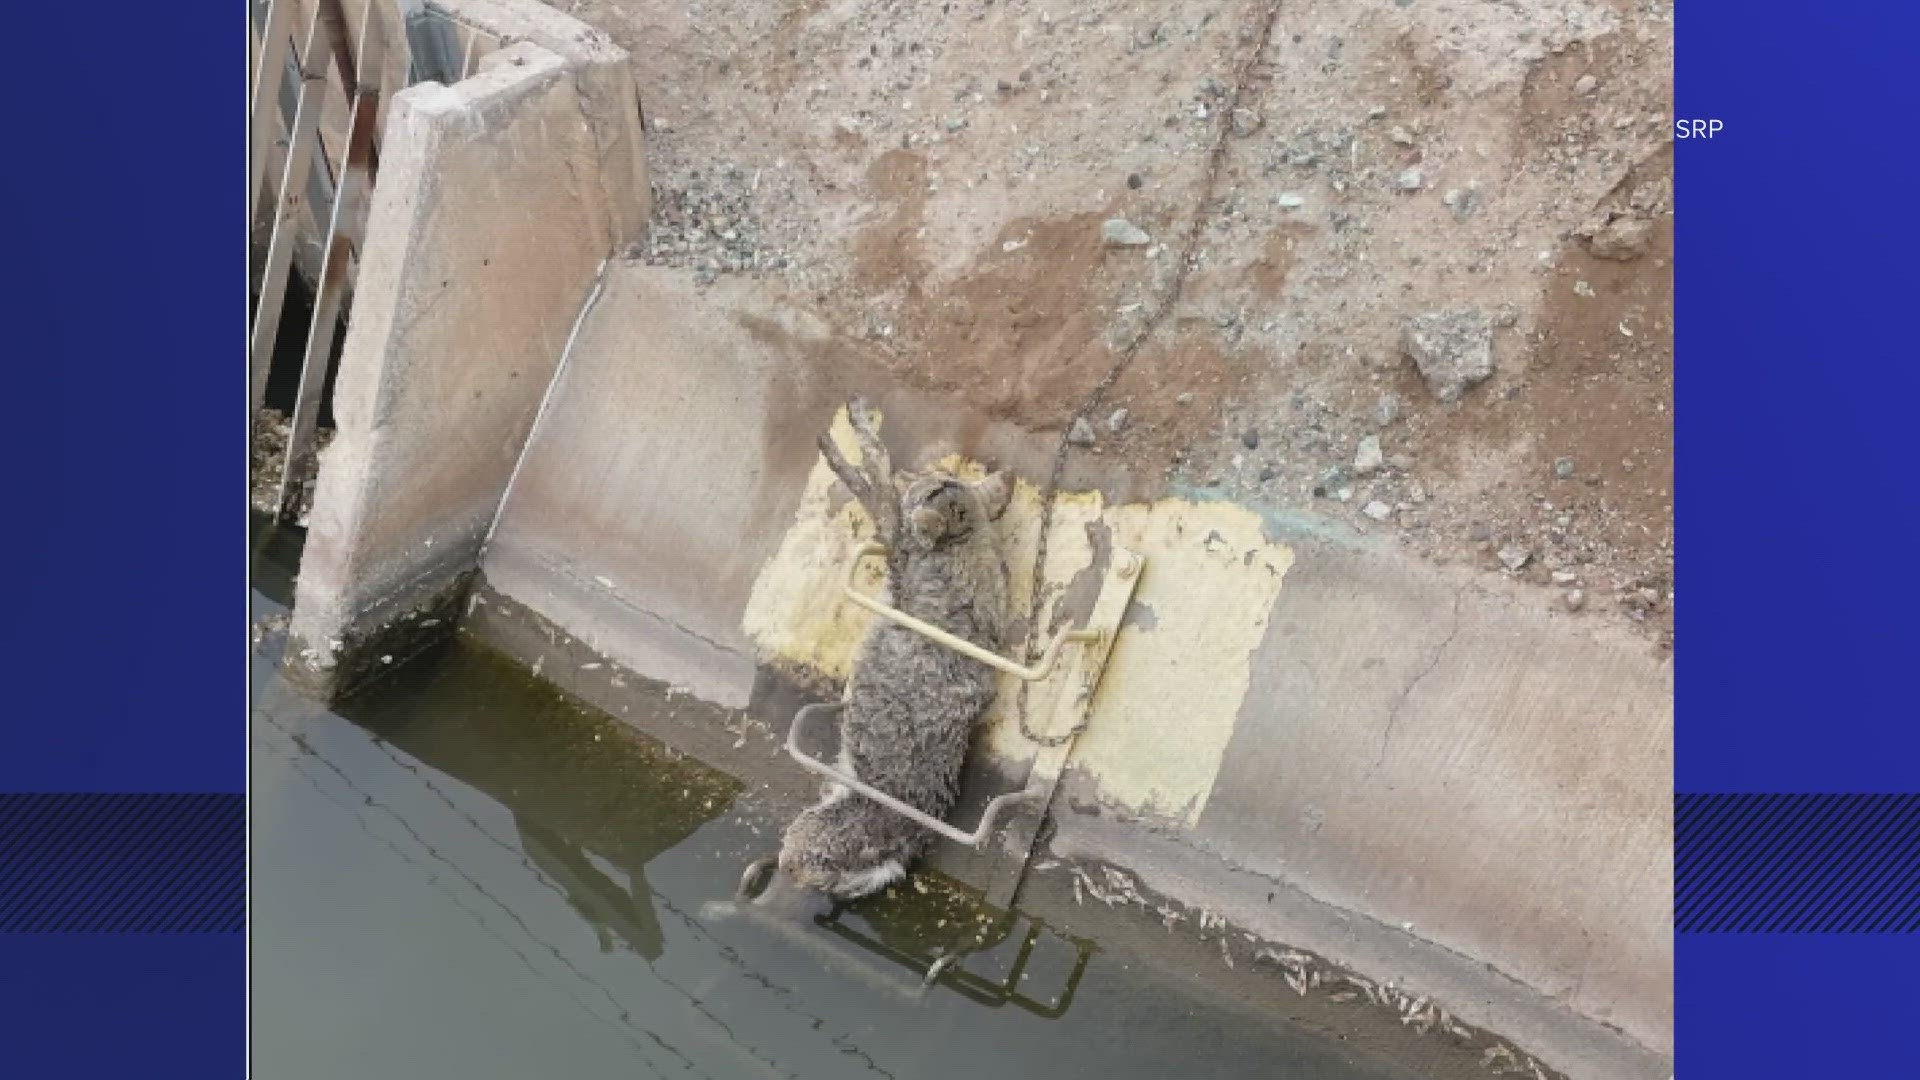 The small coyote got wedged in between the rungs of a ladder as the animal attempted to escape from a canal in south Phoenix.